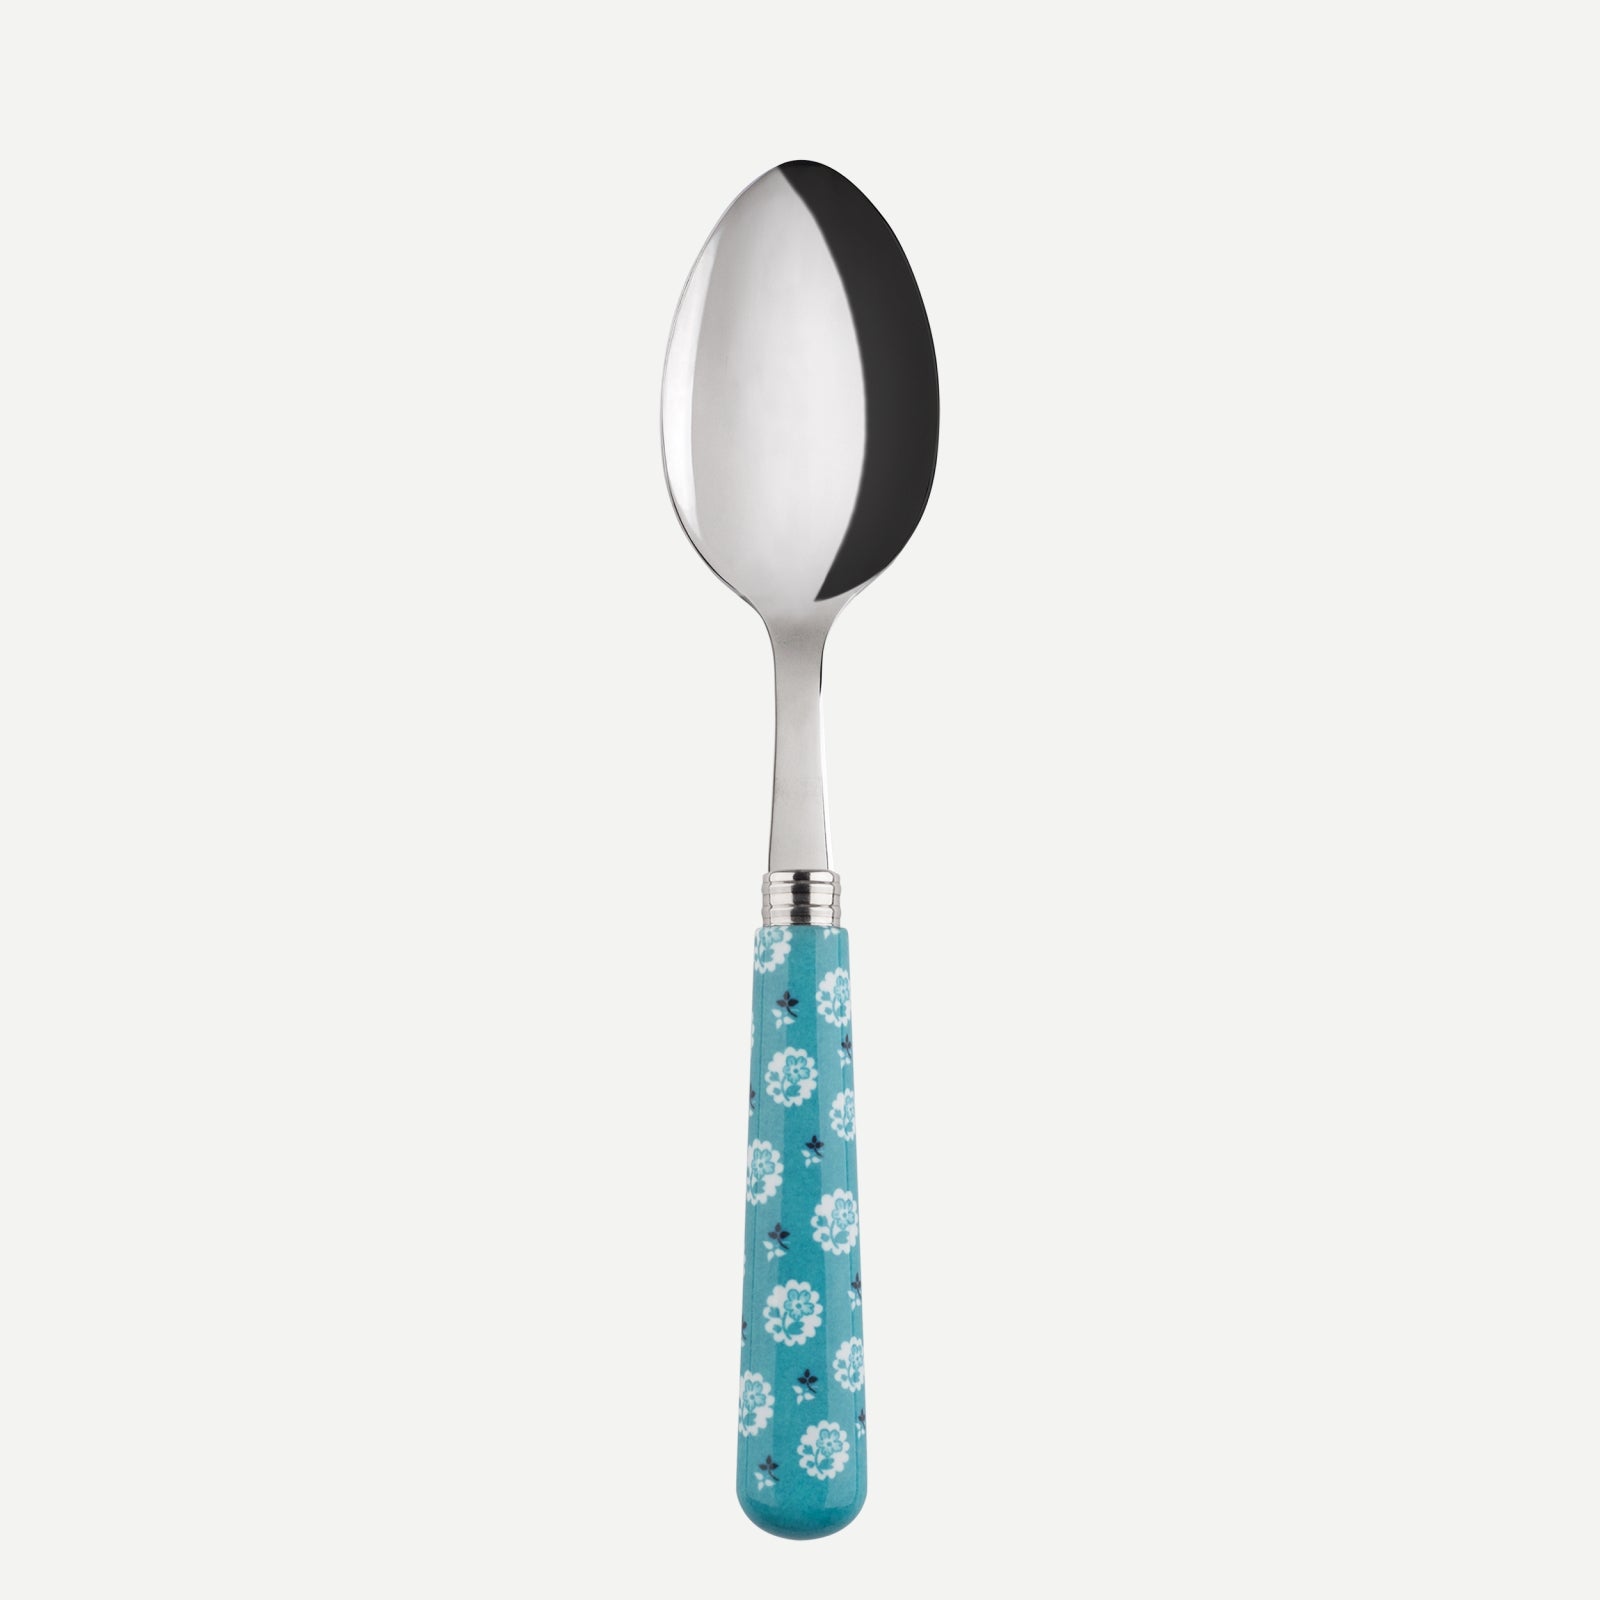 Soup spoon - Provencal - Turquoise